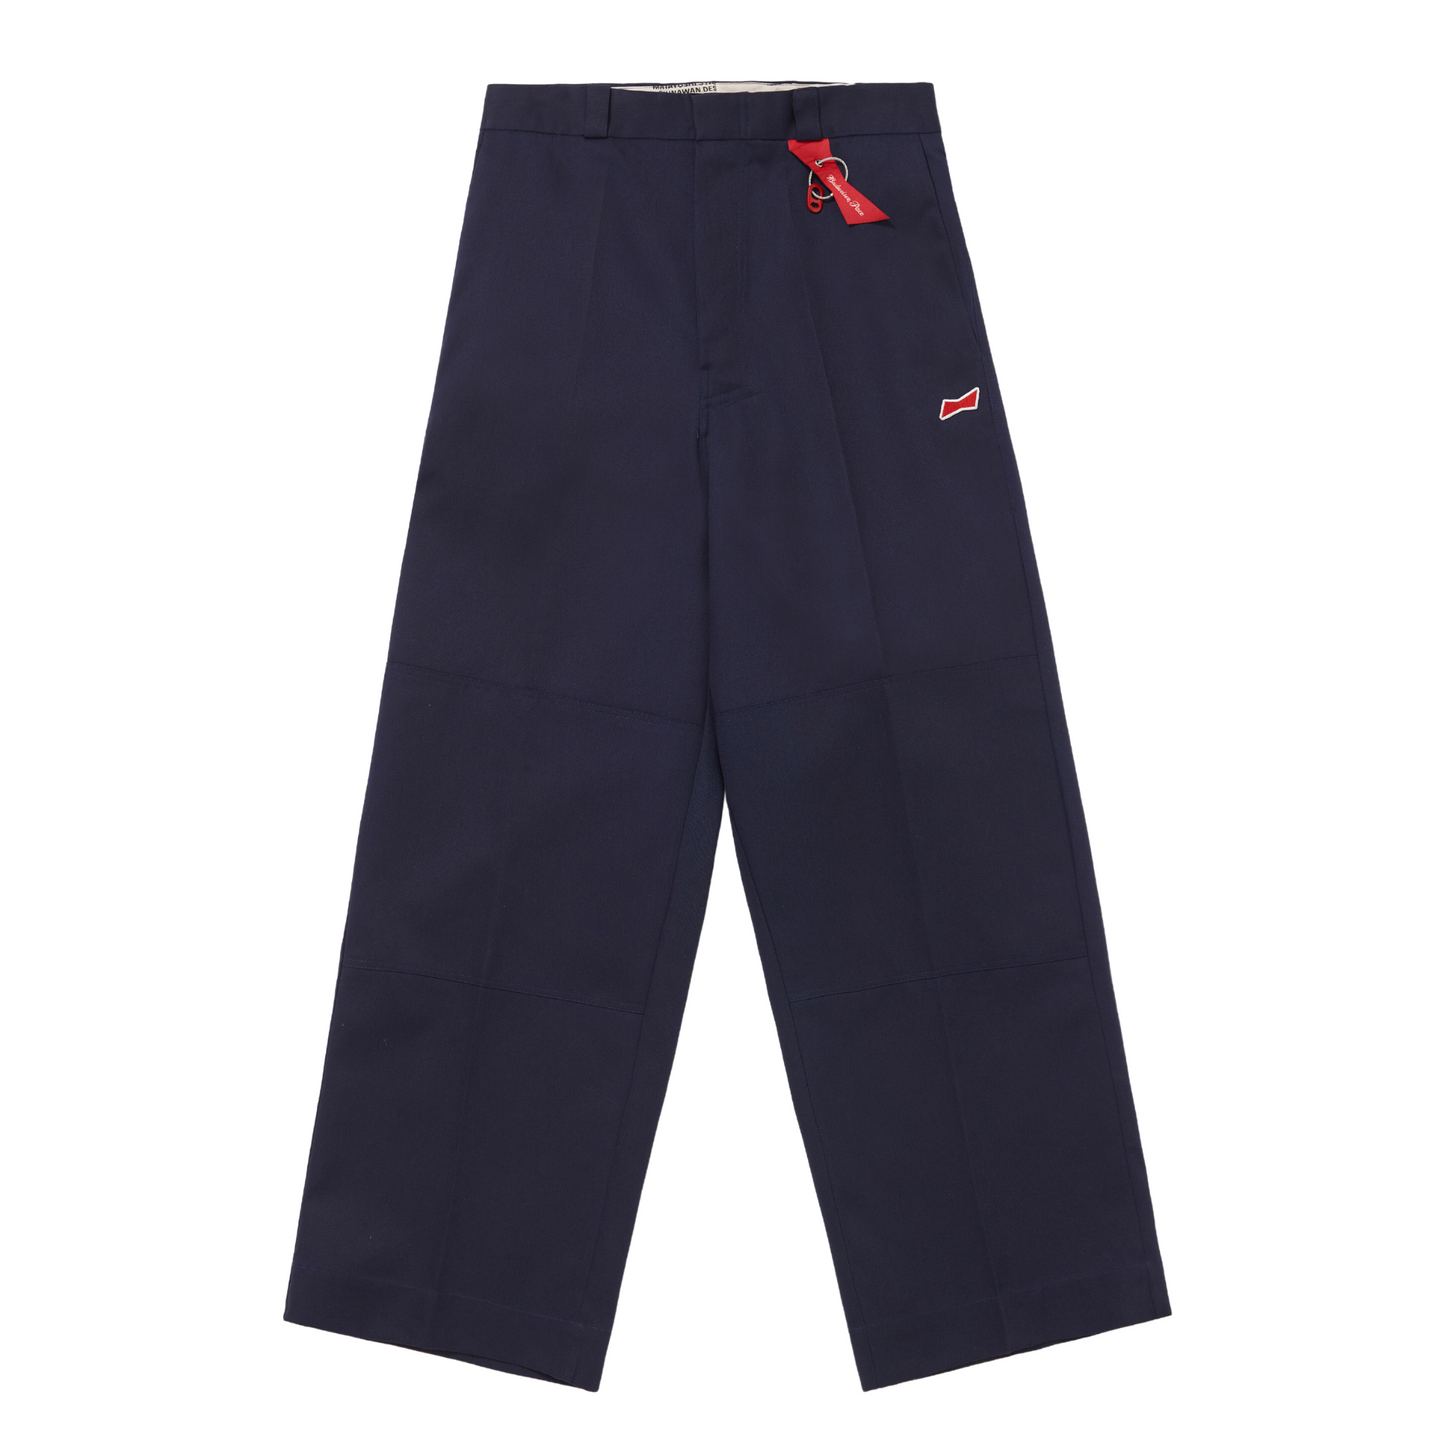 PACEWEISER - Loose Fit Pants - THE GAME